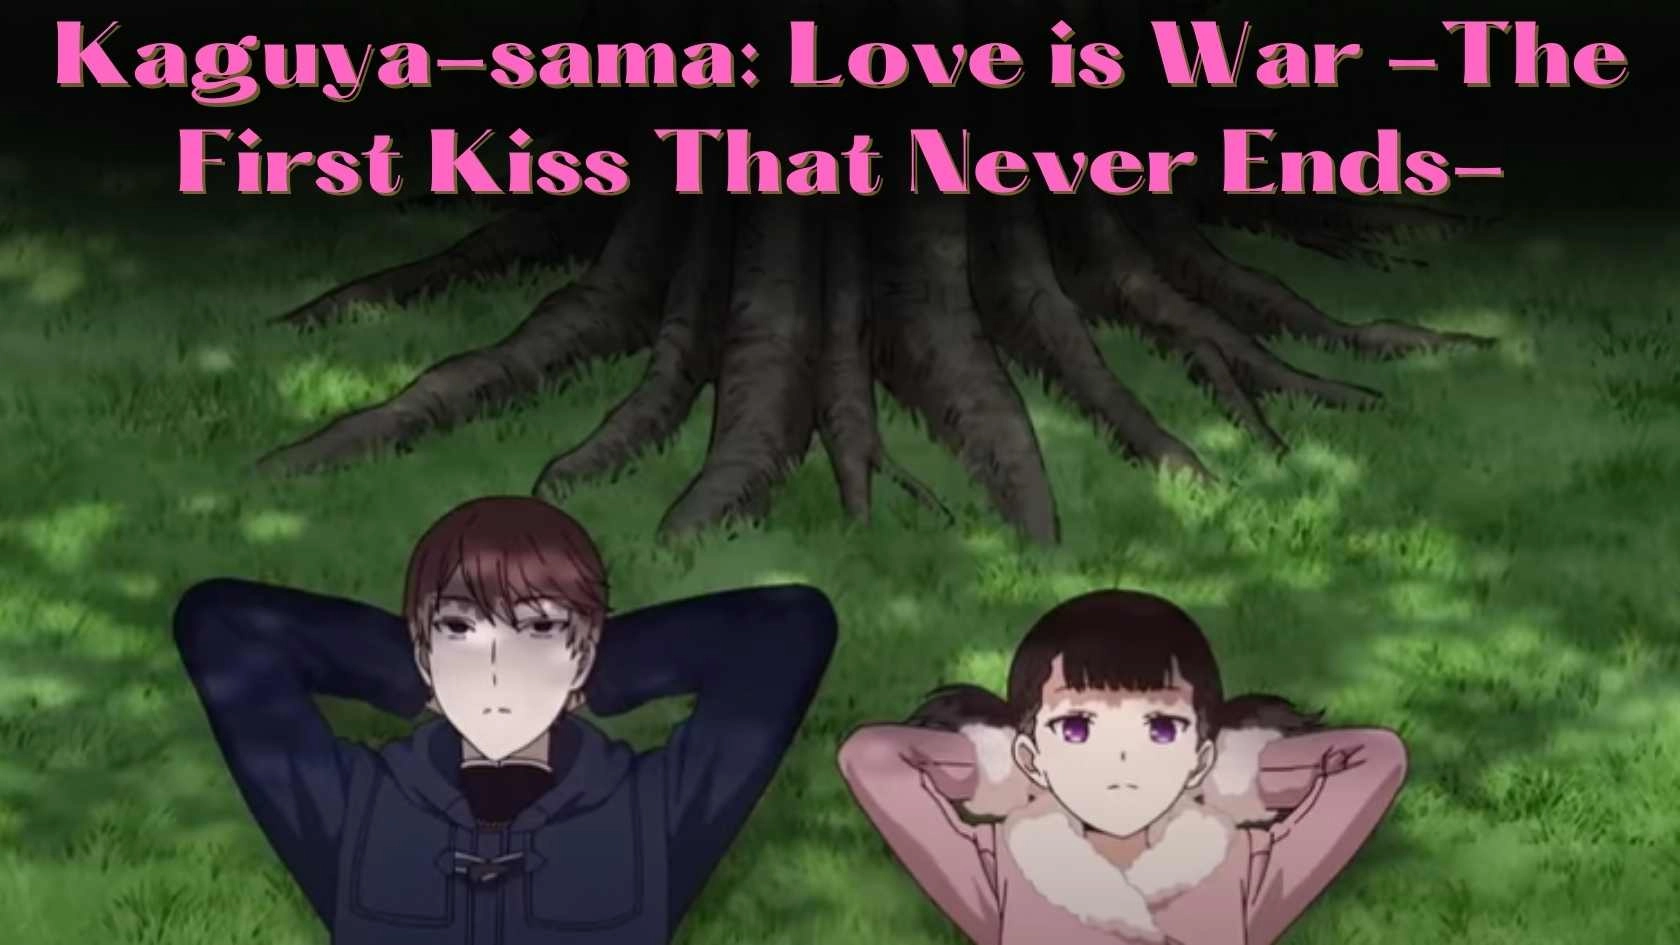 Kaguya-sama: Love is War -The First Kiss That Never Ends Parents Guide